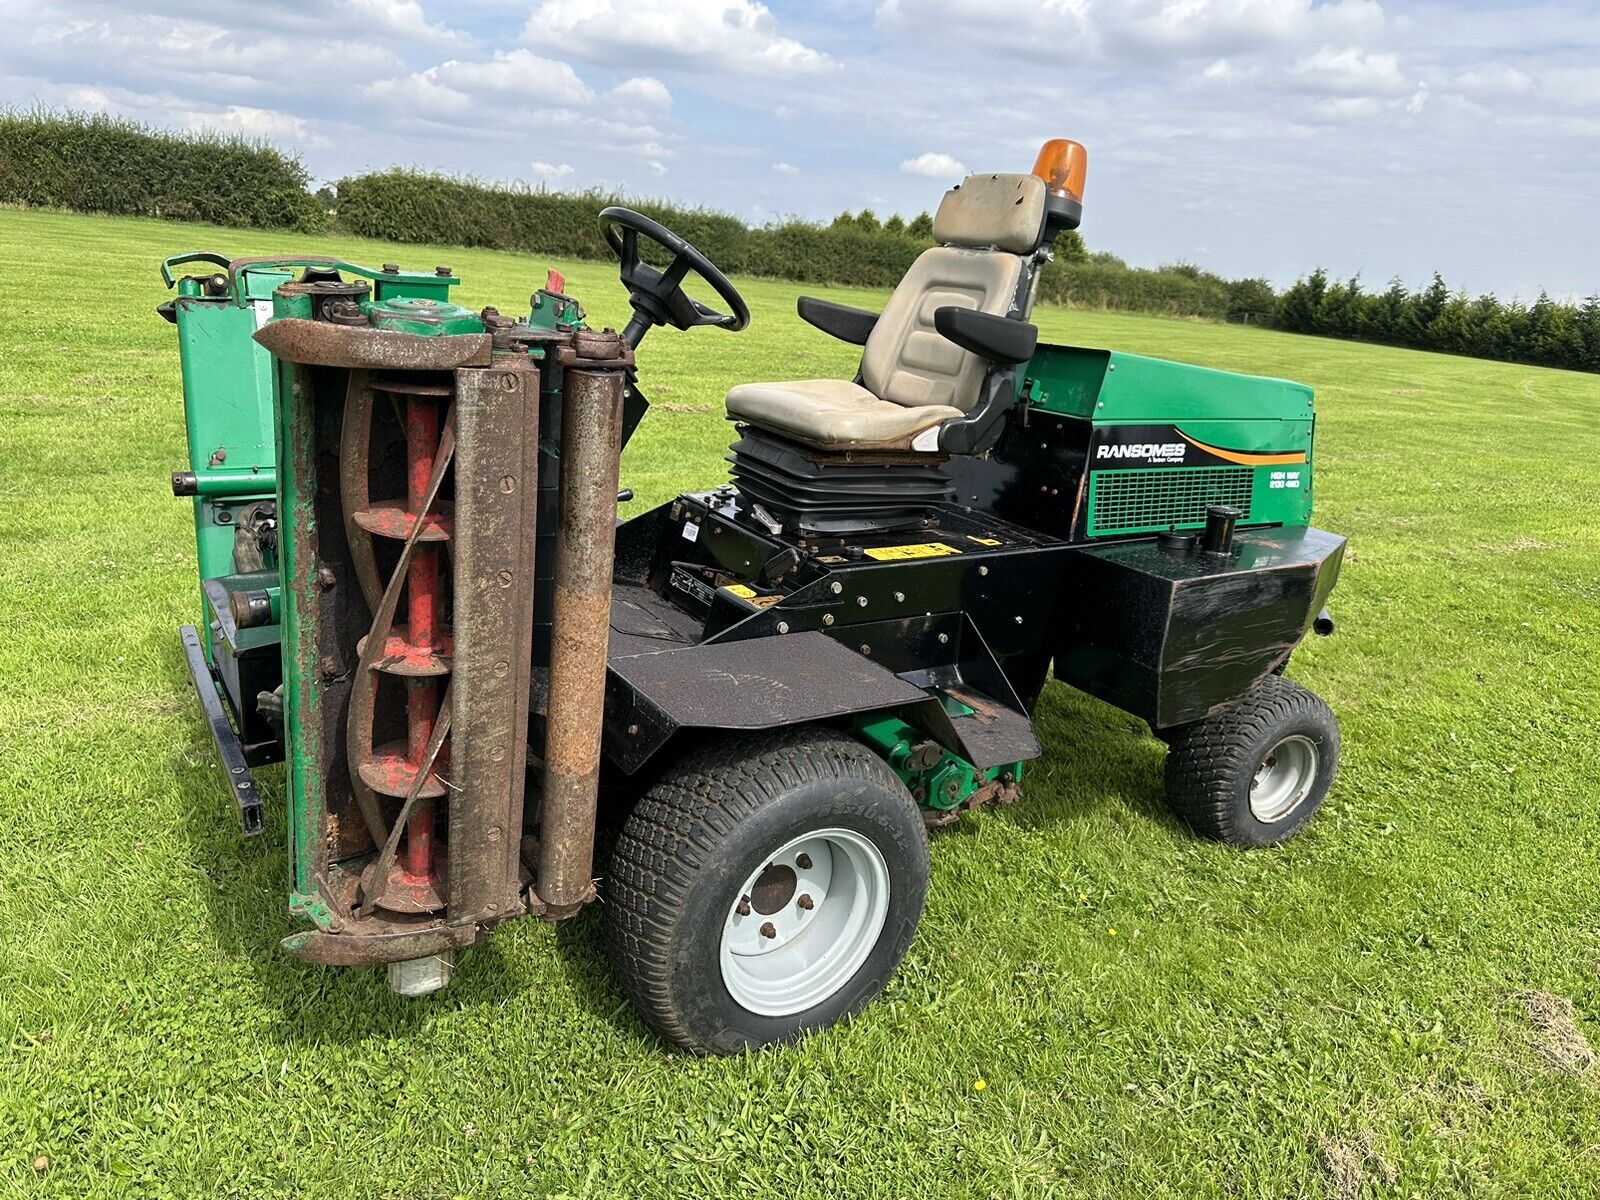 RANSOMES HIGHWAY 2130 TRIPLE CYLINDER RIDE SIT ON LAWN MOWER PARKWAY